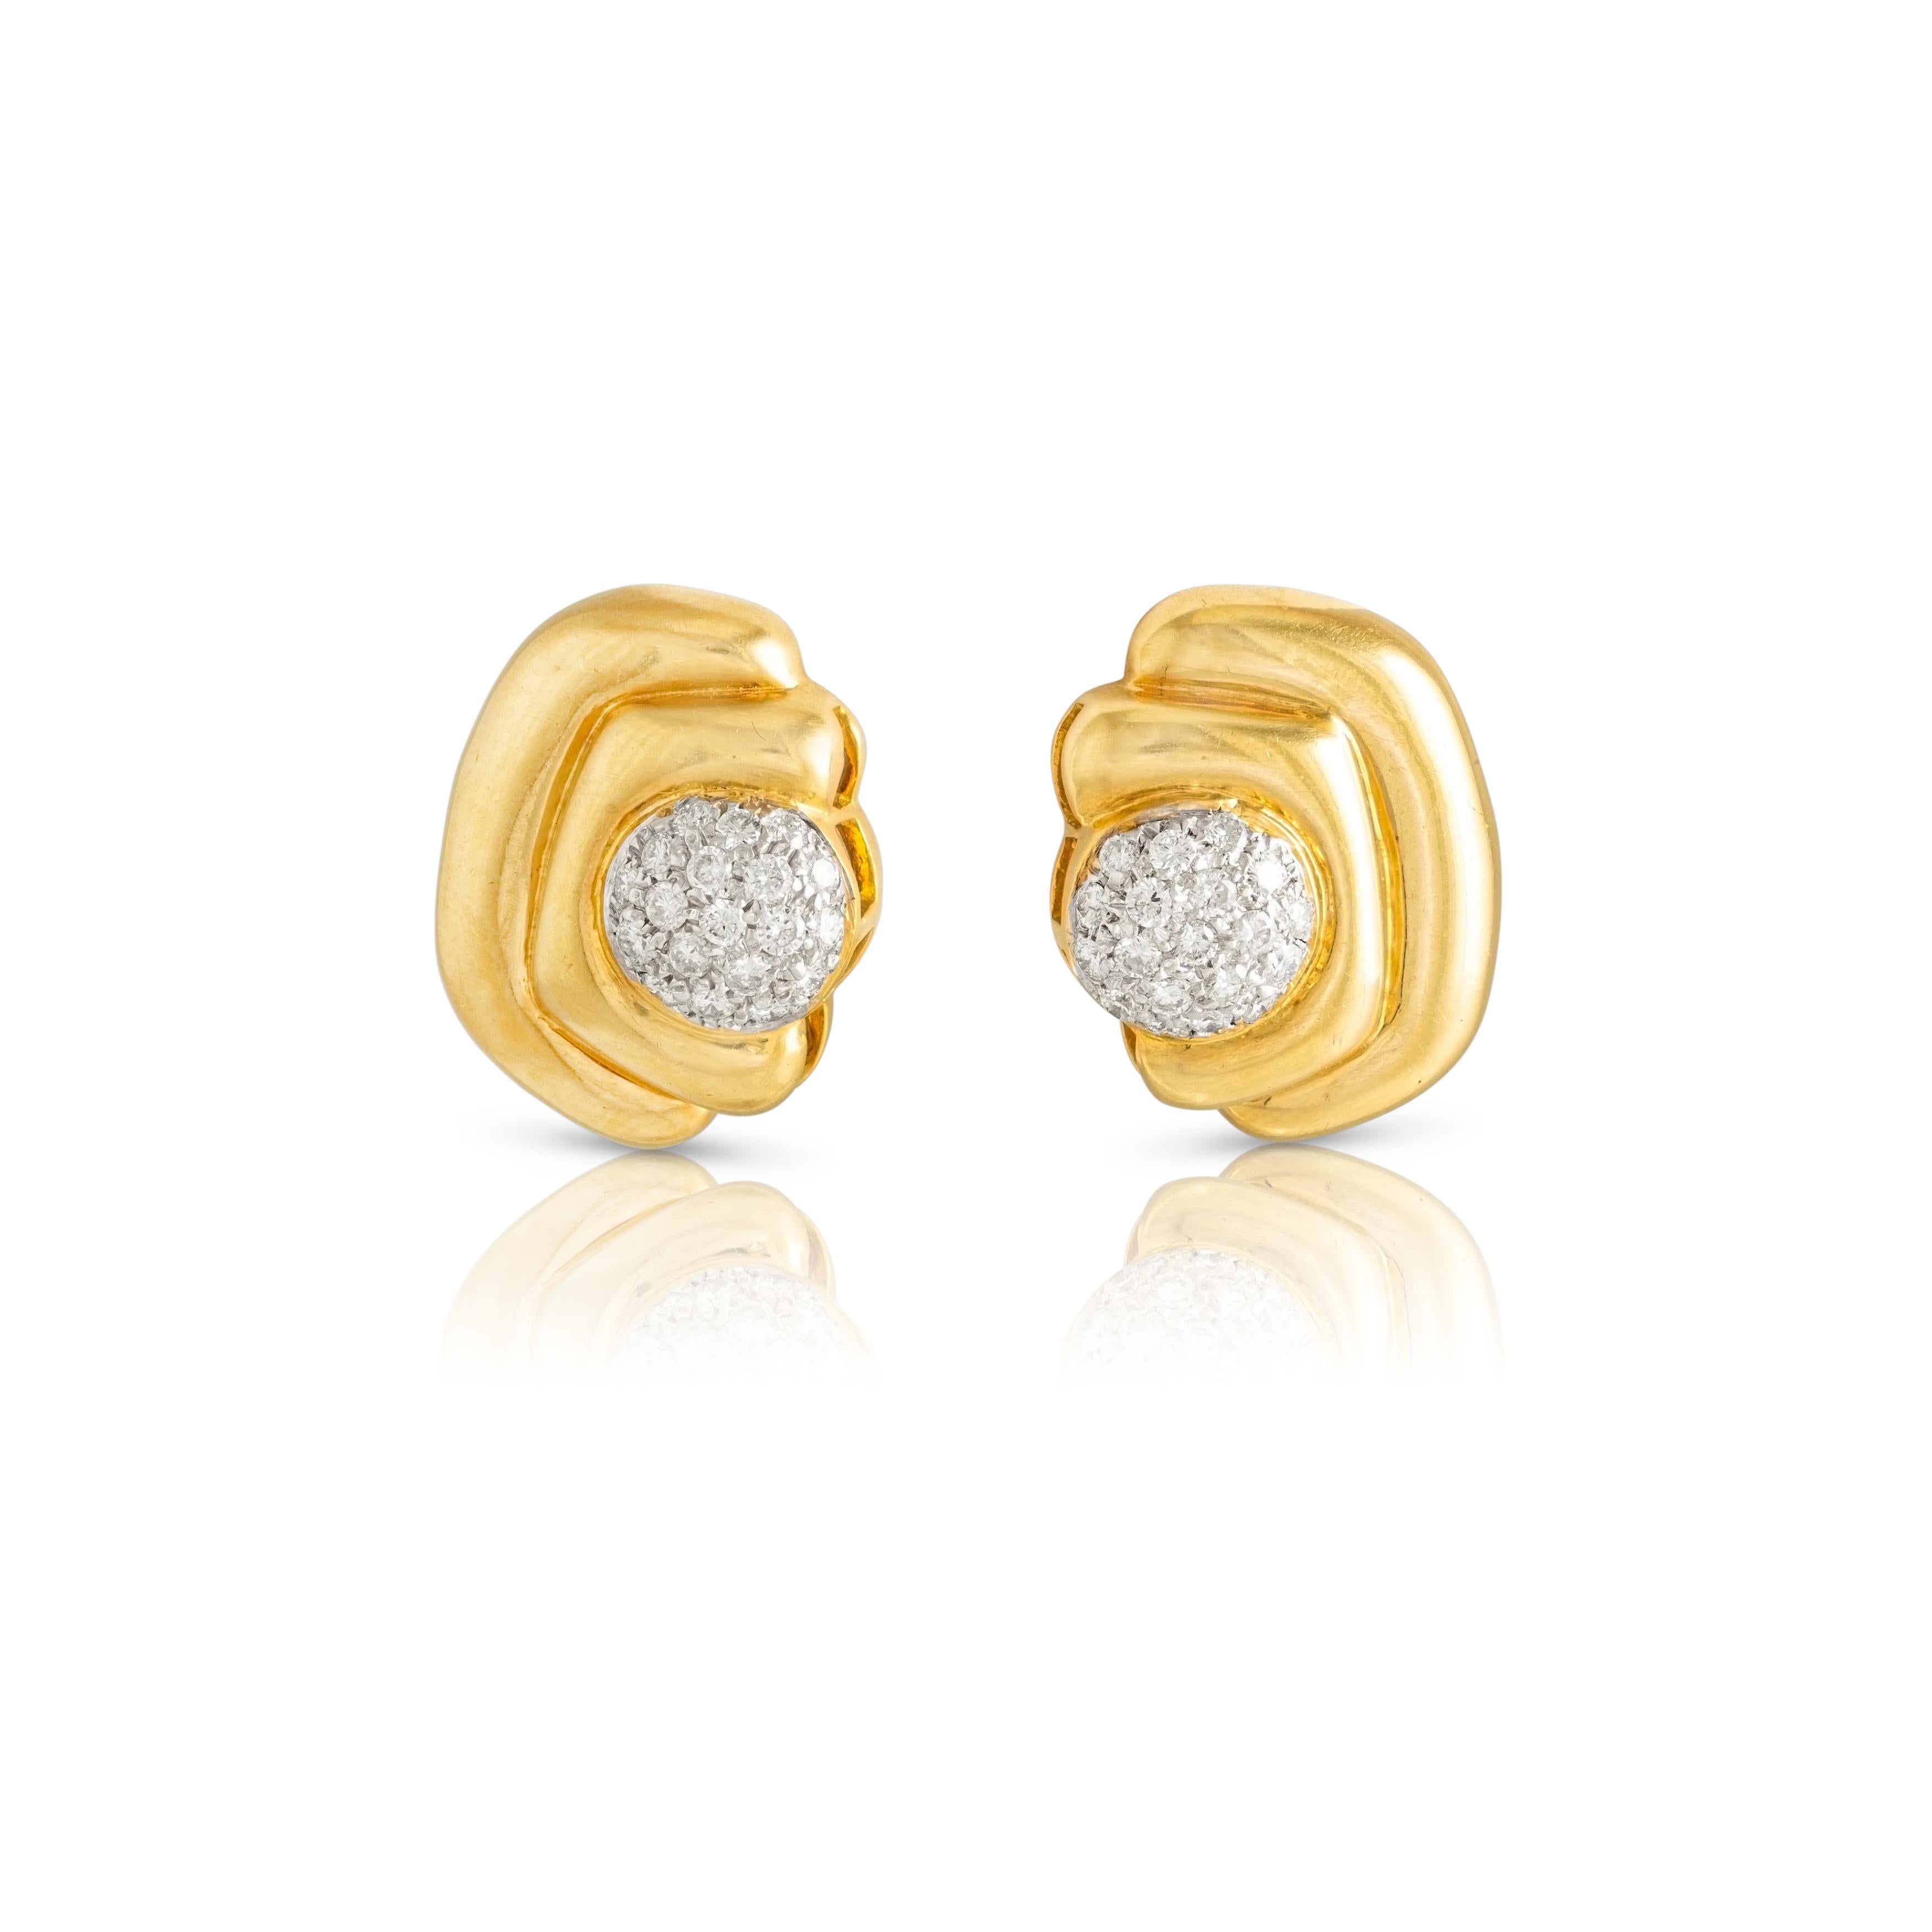 Contemporary IGI Certified Gold Drop Earrings in Bracket Design with 1ct Diamond Centre For Sale